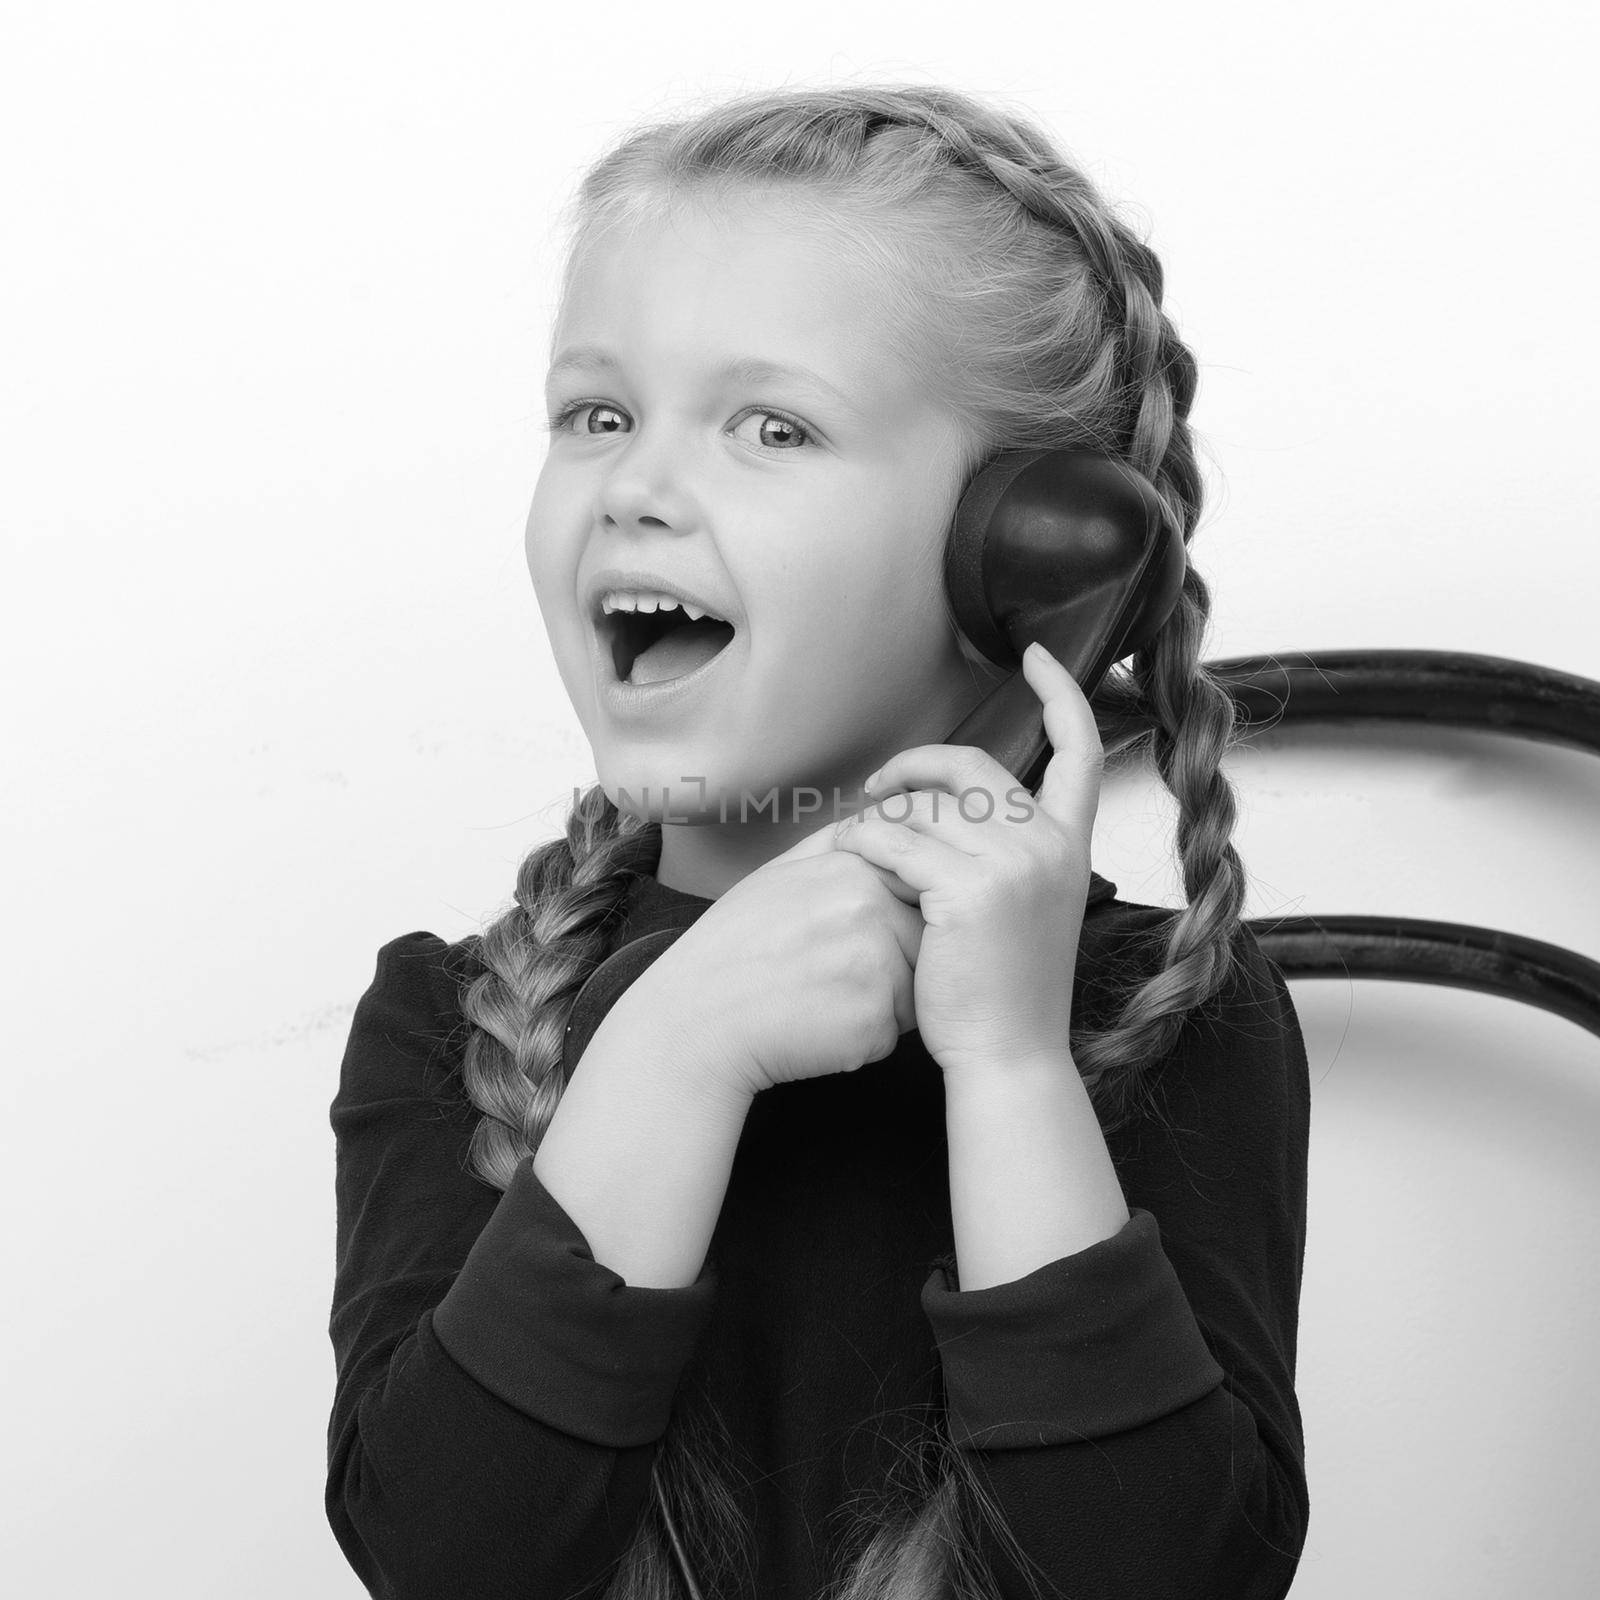 Happy girl talking by old telephone. Black and white portrait of smiling lovely kid sitting on chair. Cute six years old girl with braids speaking on vintage phone